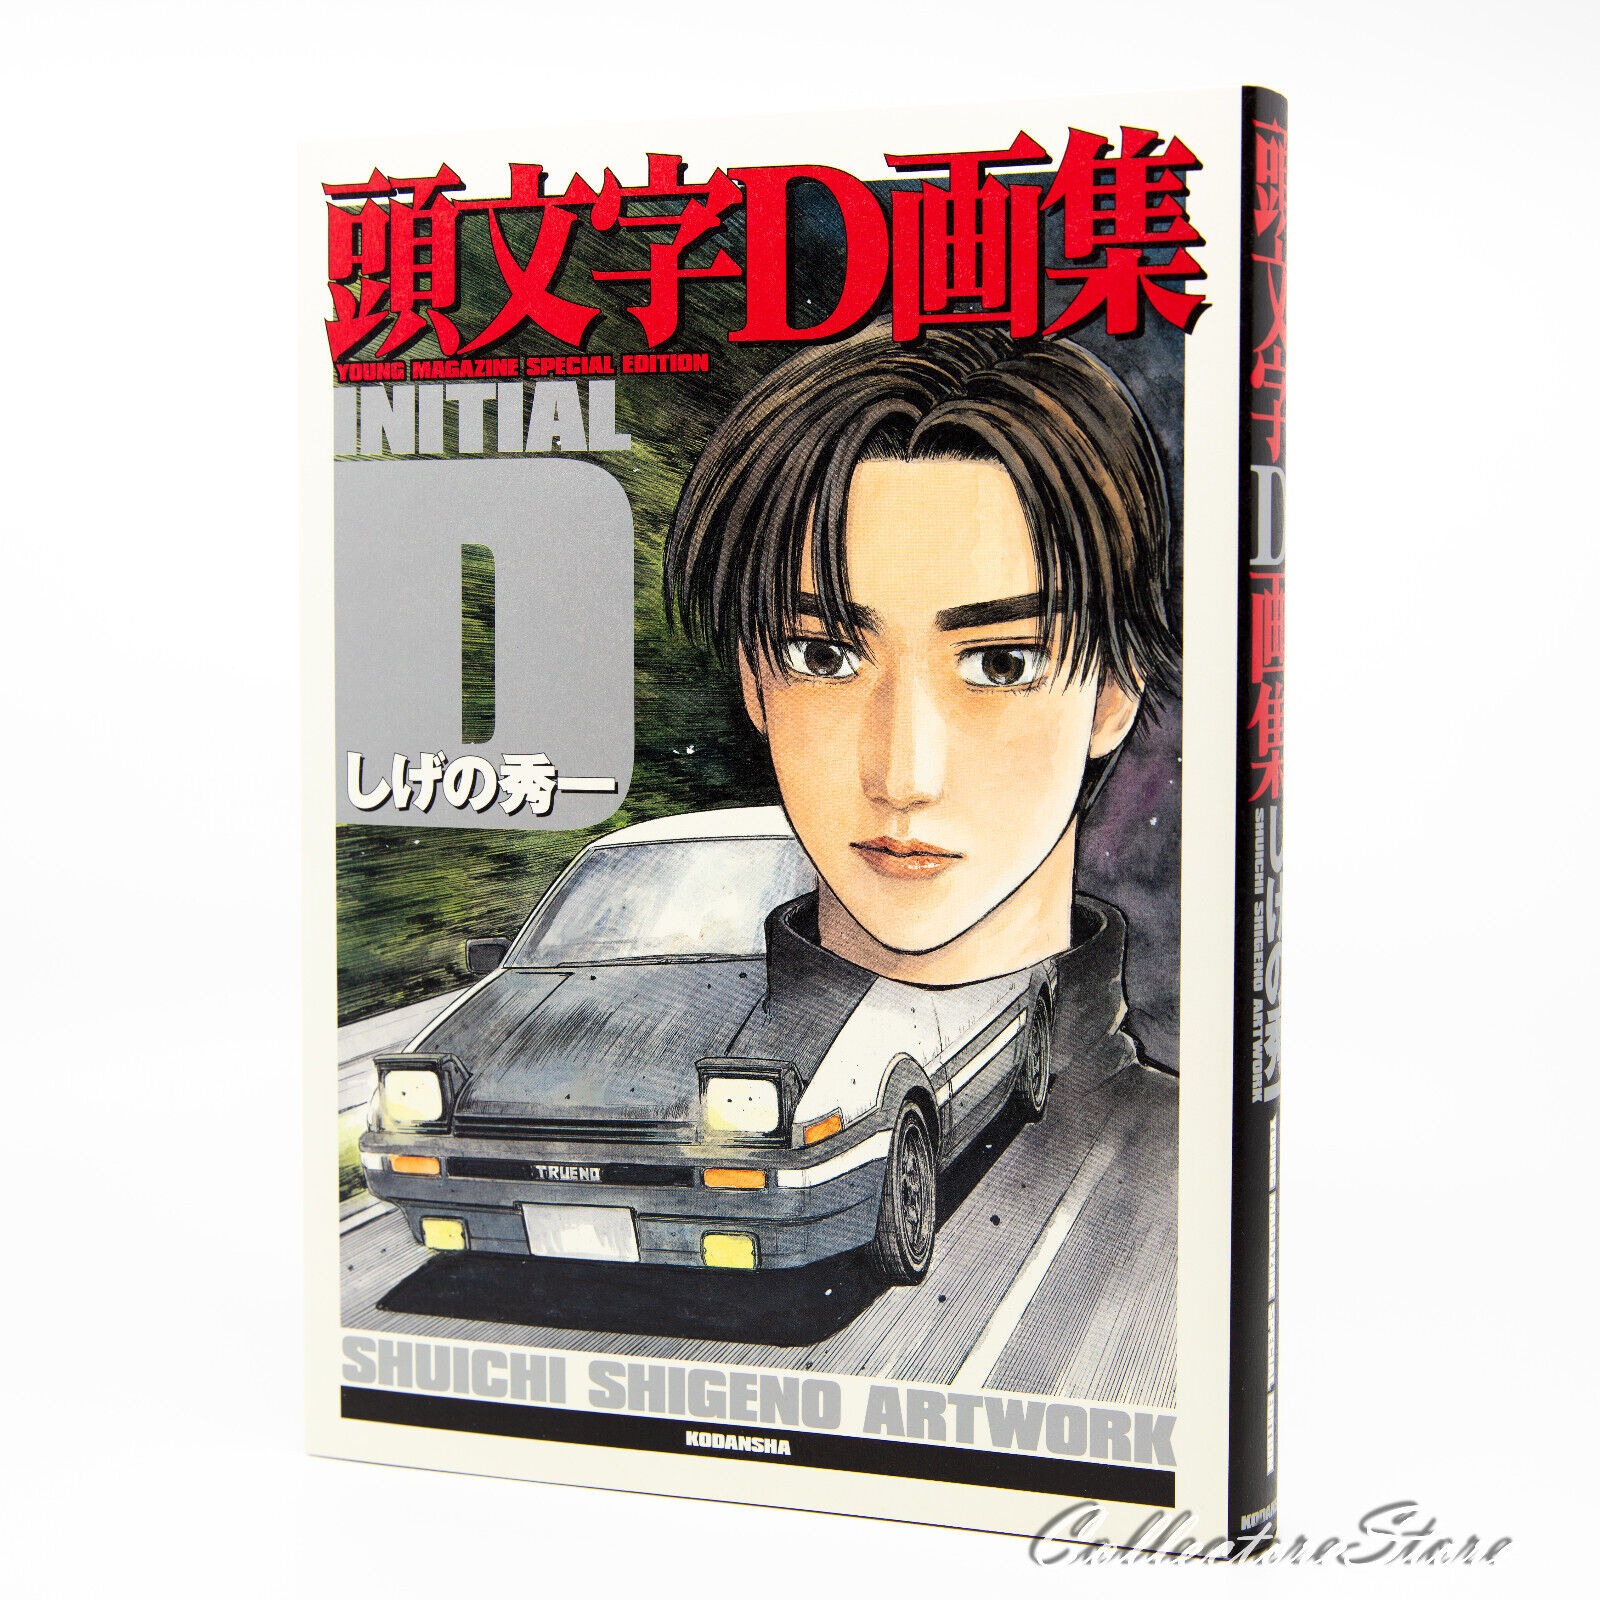 Initial D Shuichi Shigeno Art Work Young Magazine Special Edition (USPS/UPS)